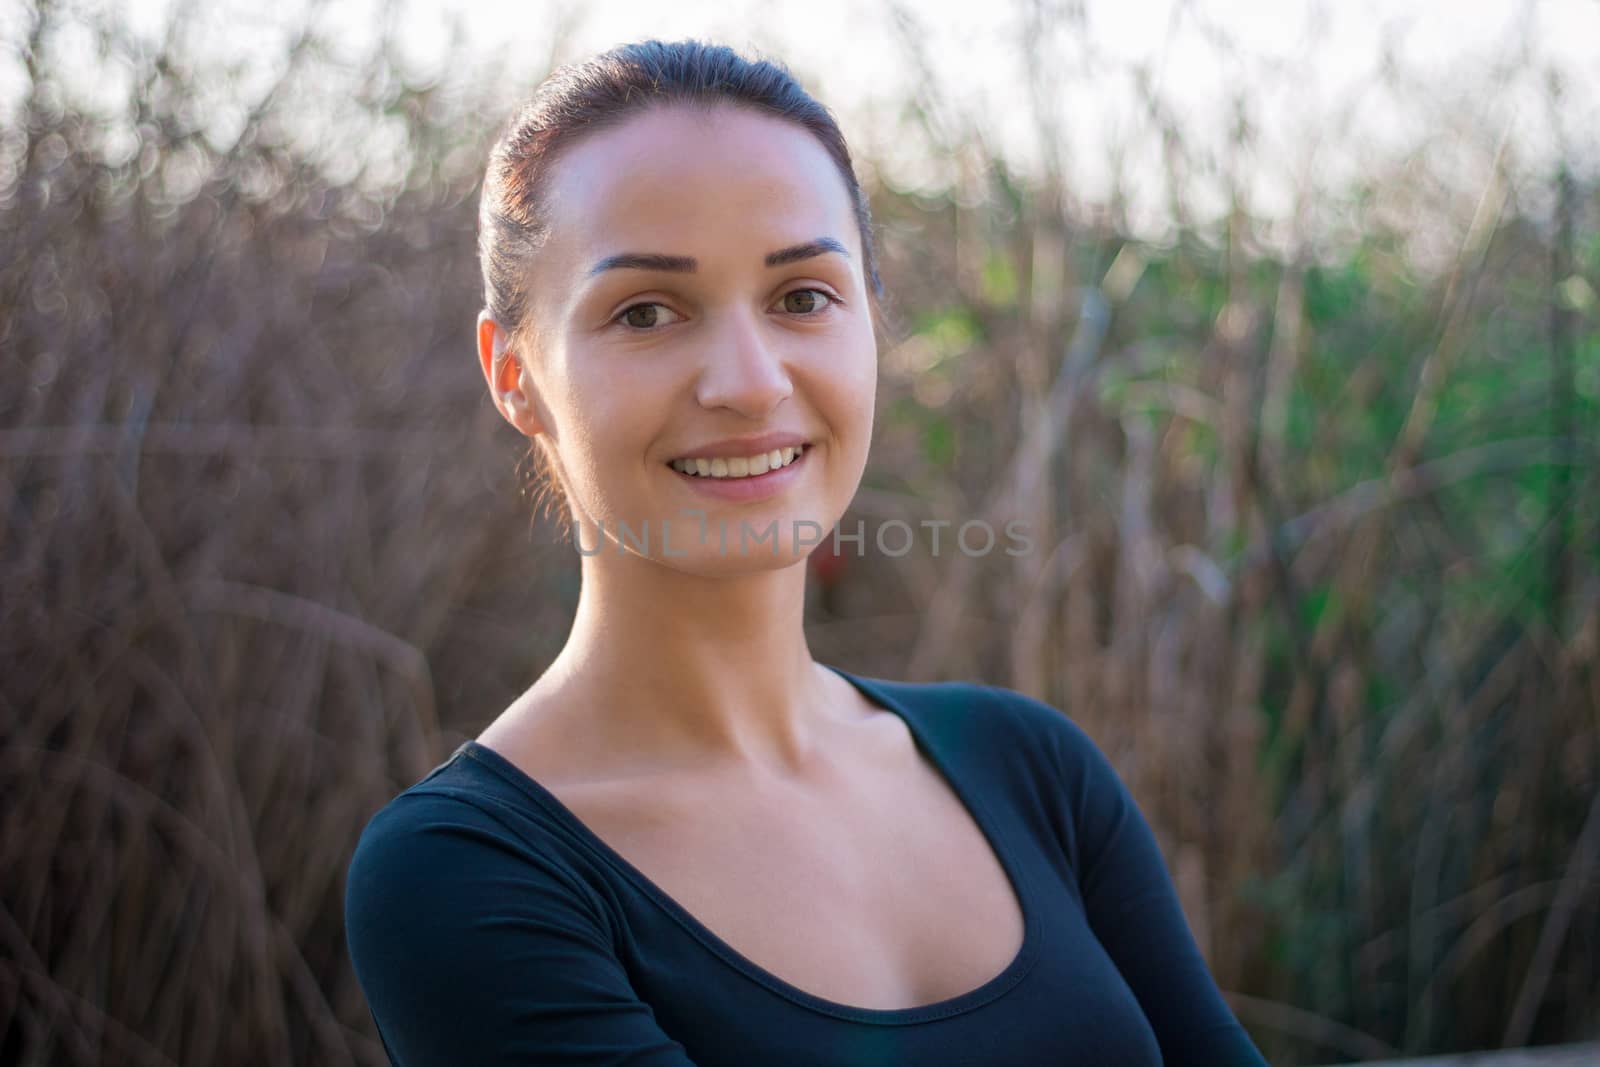 Young pretty woman portrait with water reed background